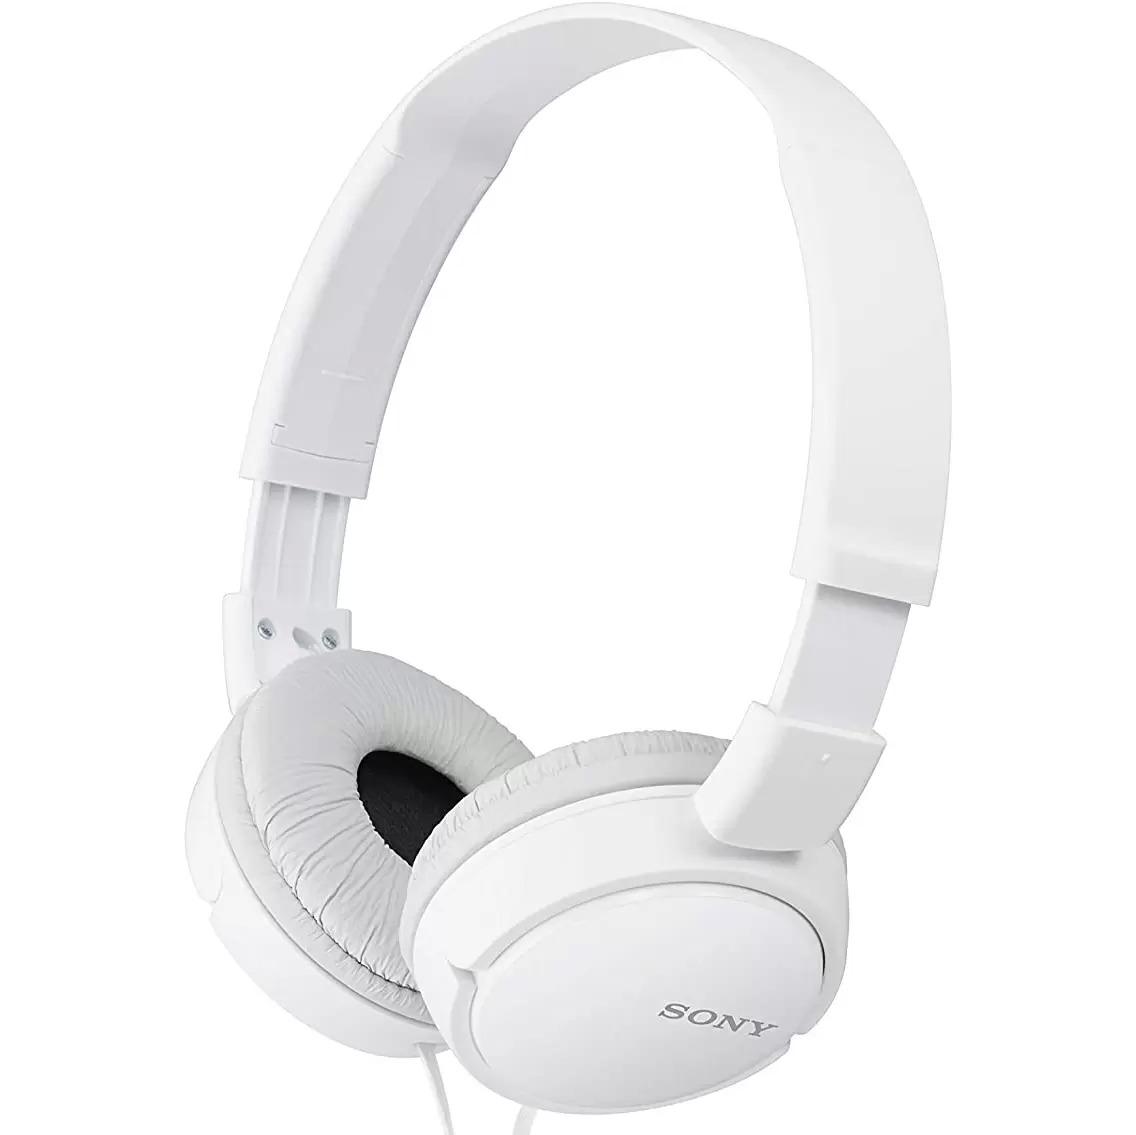 Sony MDRZX110 Wired Stereo Headphones for $9.99